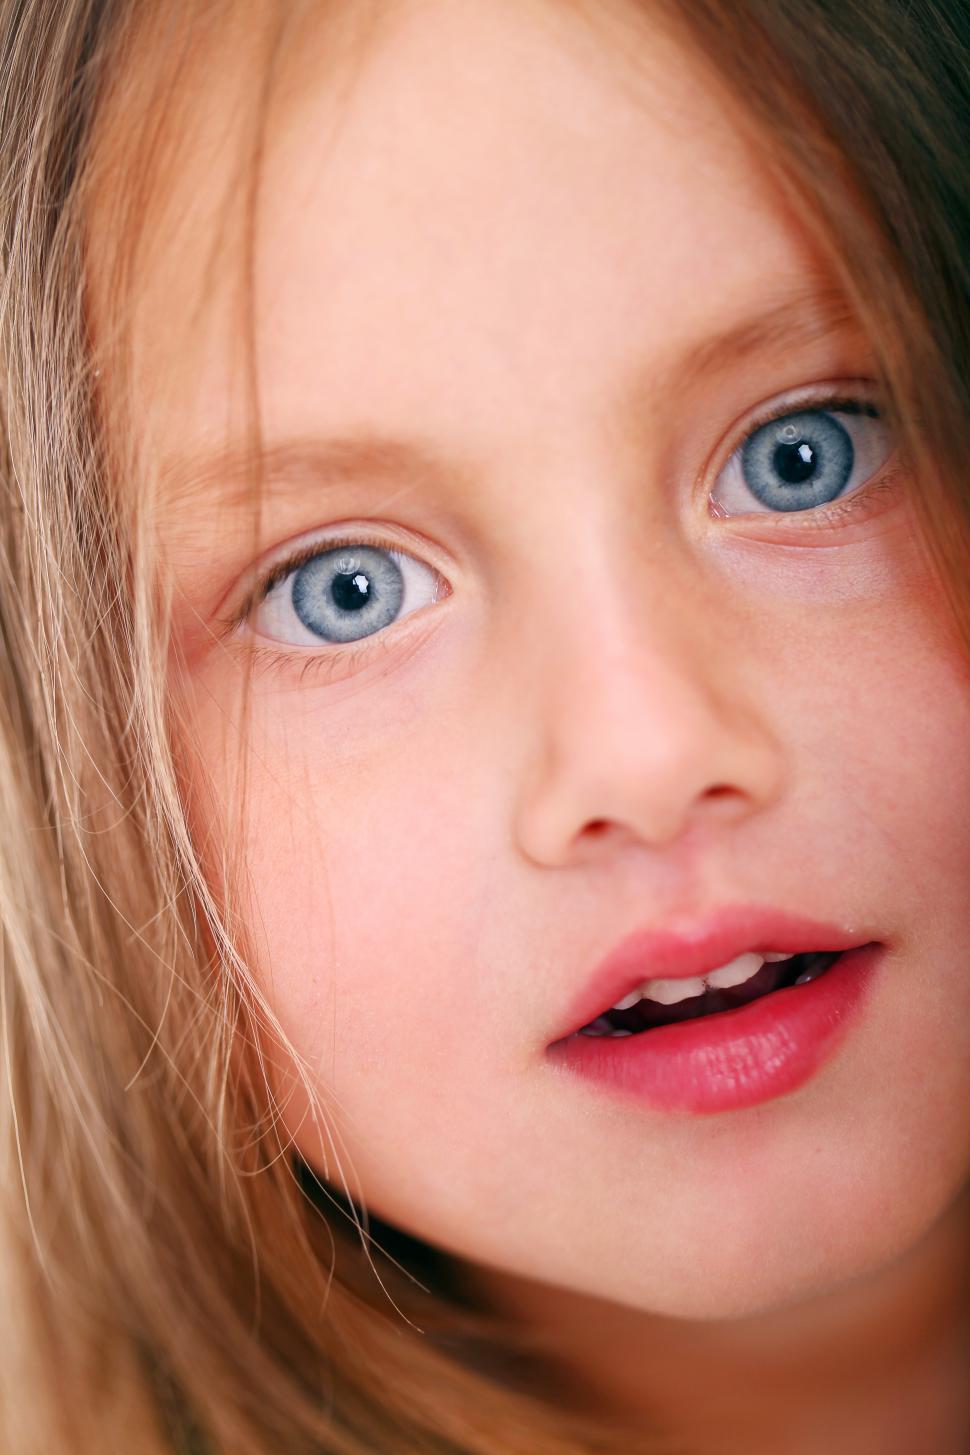 Download Free Stock Photo of Young girl with blue eyes, close up 